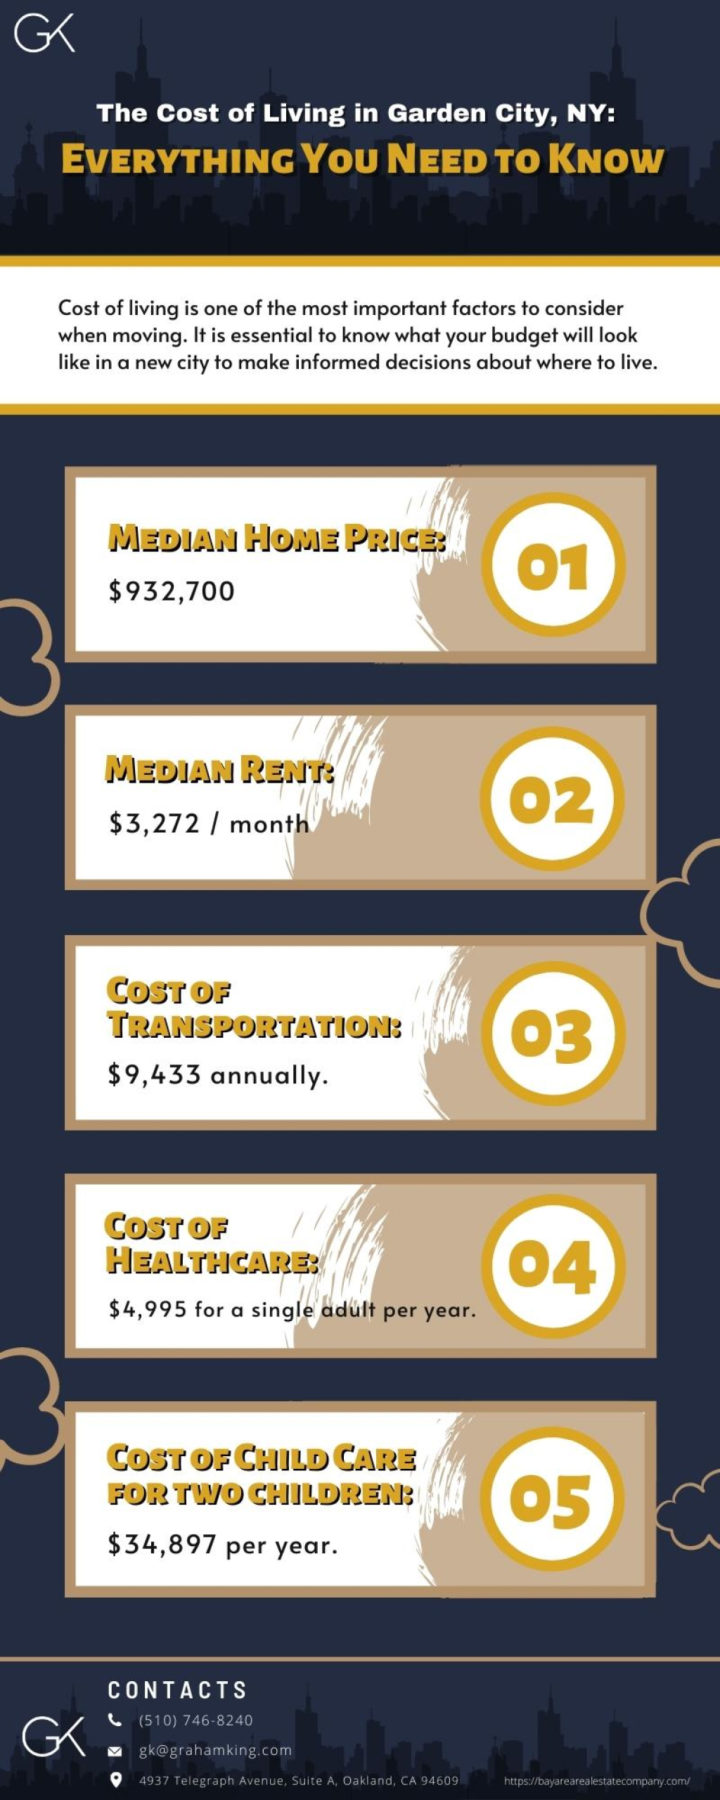 Cost of Living in Garden City, NY